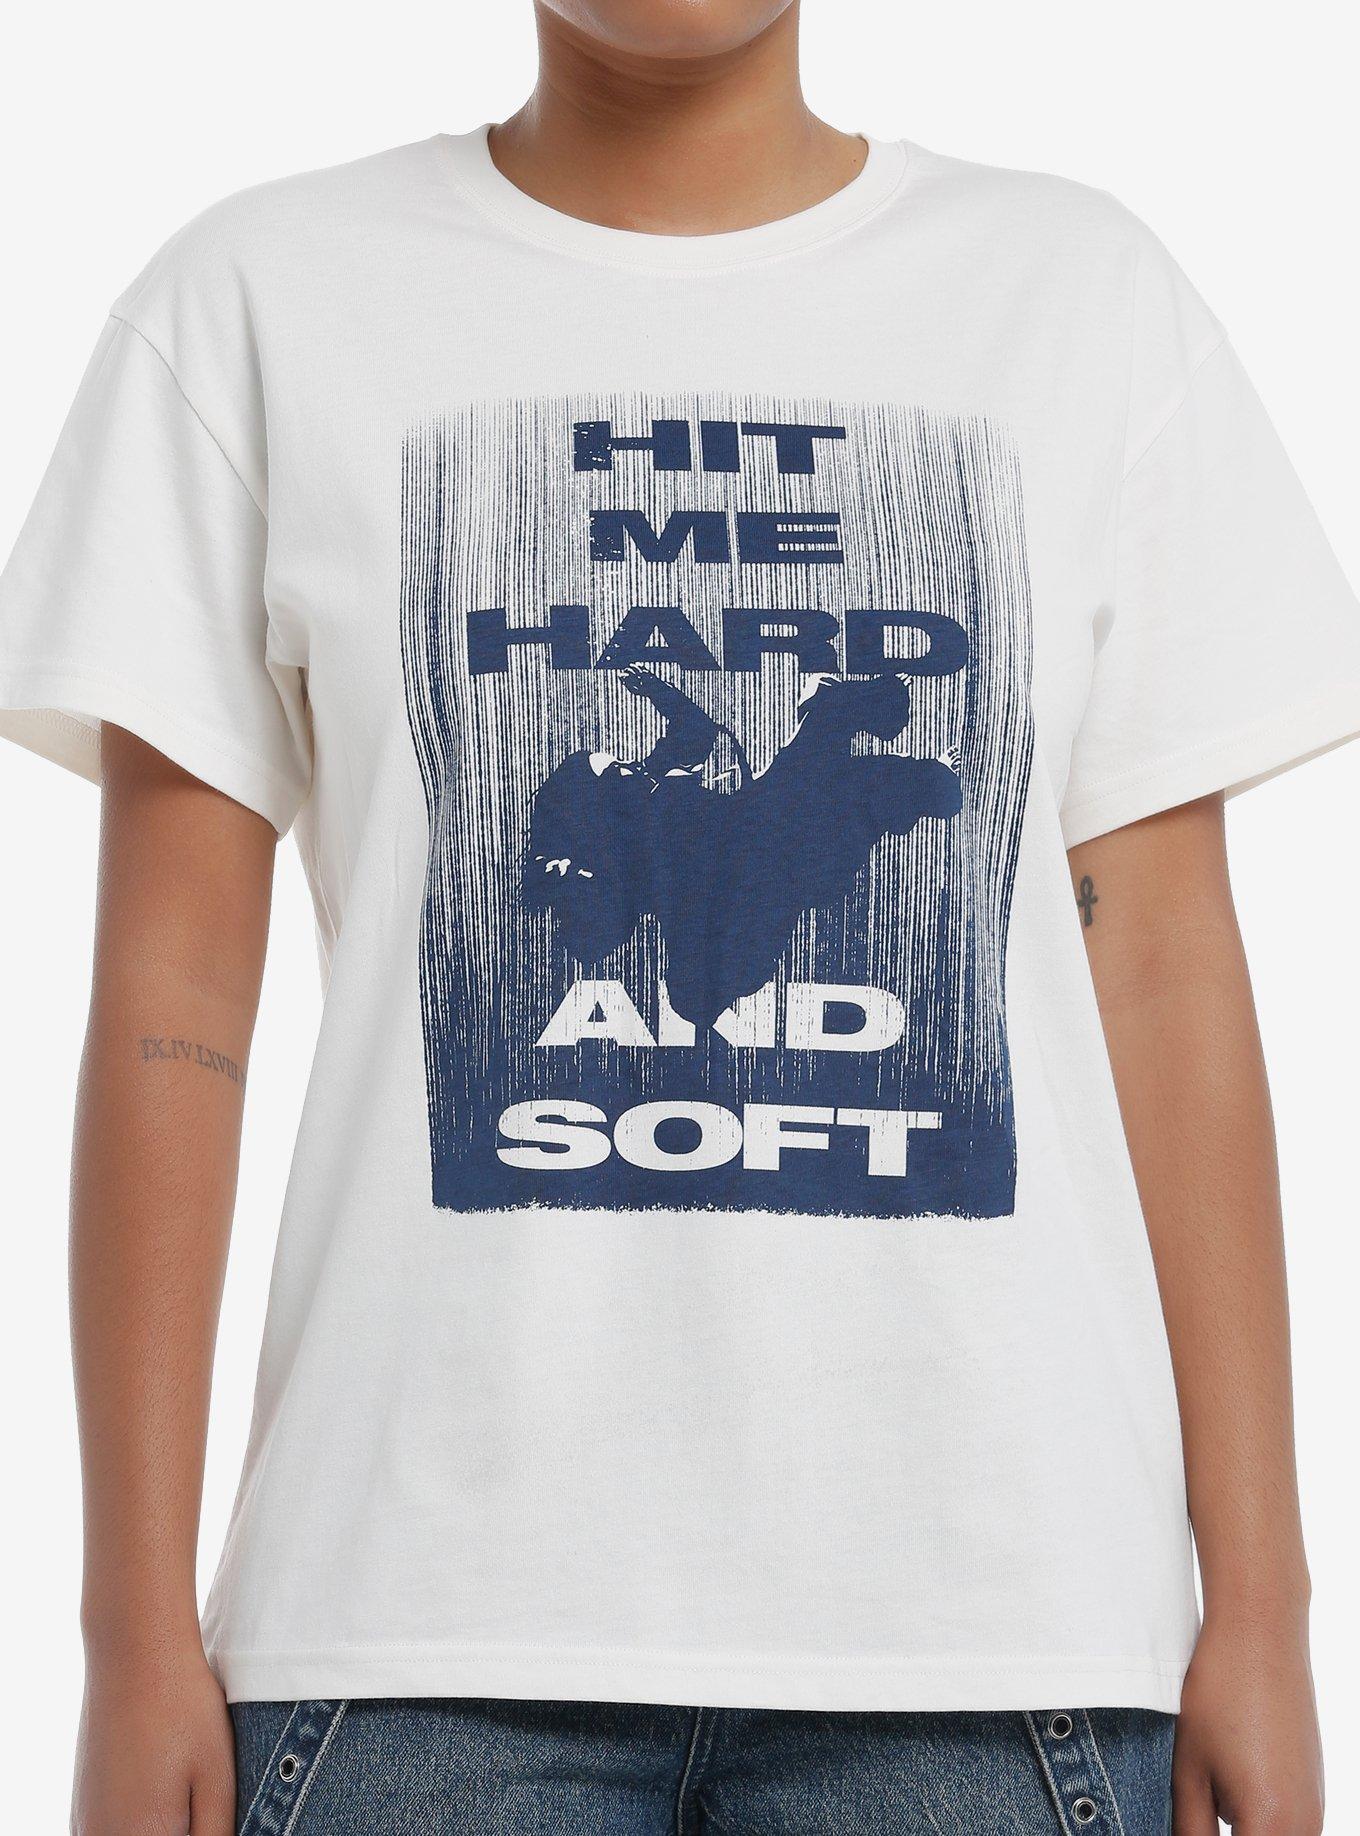 Billie Eilish Hit Me Hard And Soft White T-Shirt Hot Topic Exclusive, BRIGHT WHITE, hi-res